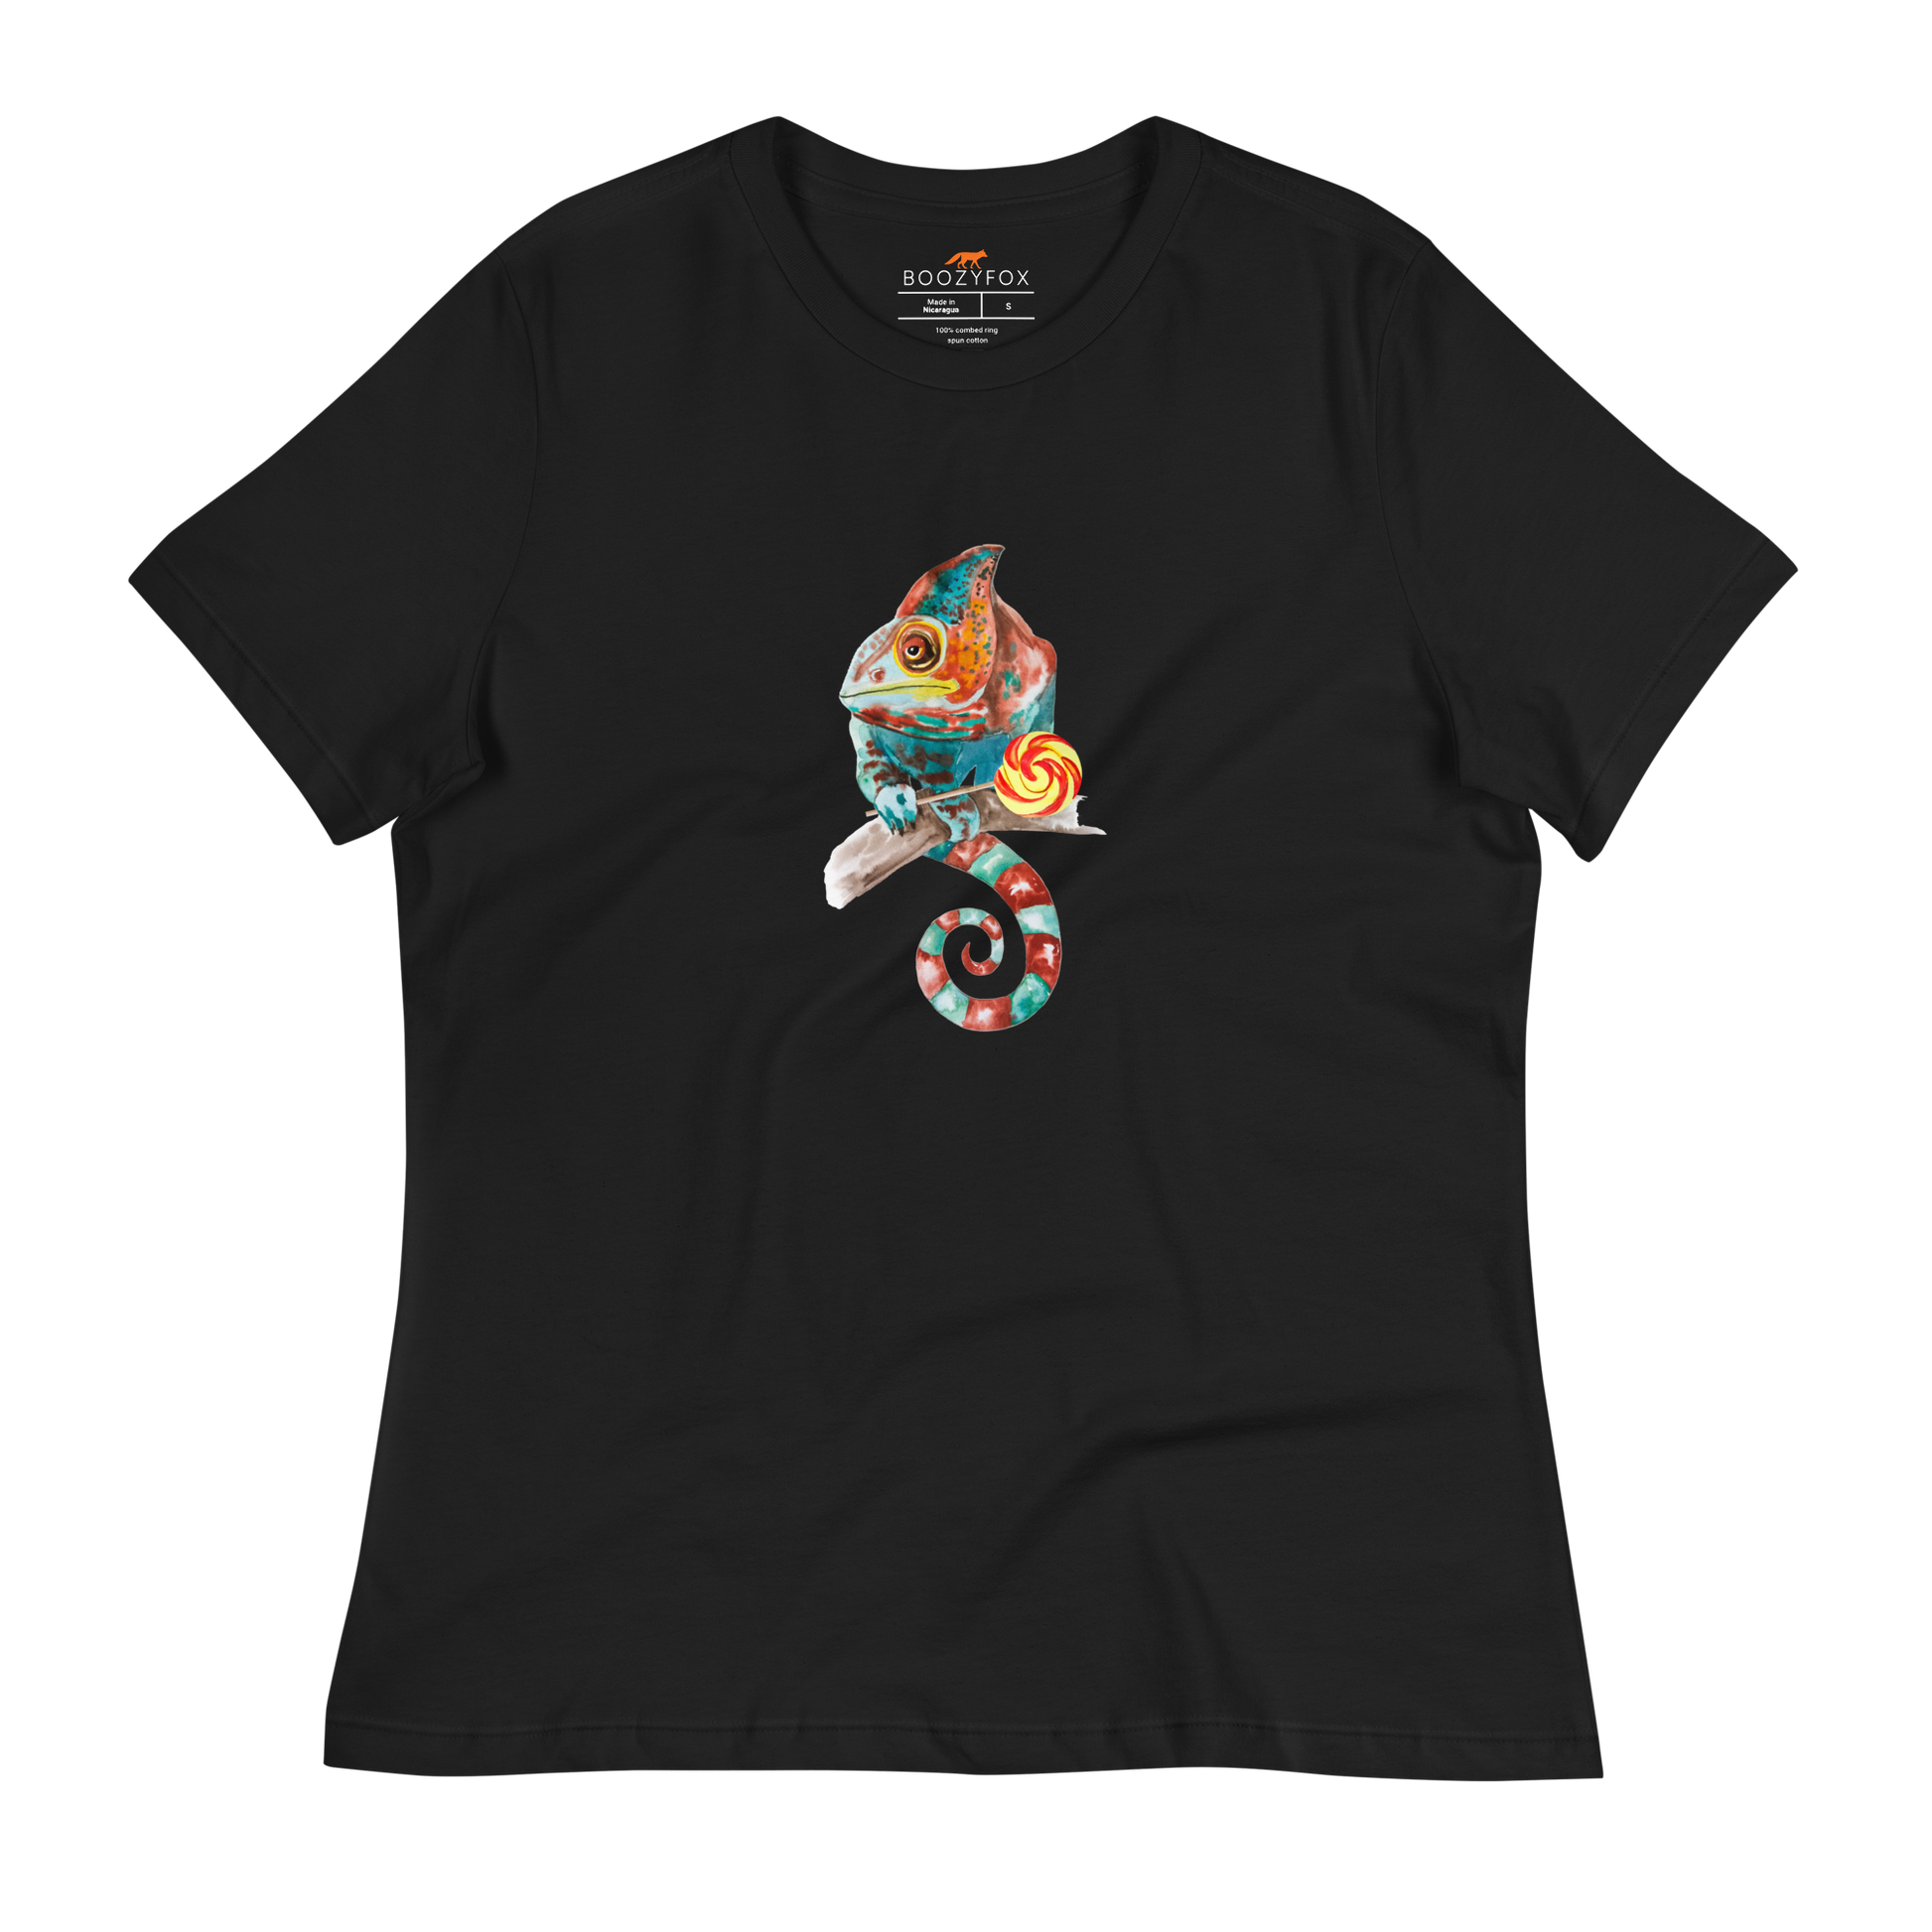 Women's relaxed black Chameleon t-shirt featuring a colorful Chameleon With A Lollipop graphic on the chest - Women's Graphic Chameleon Tees - Boozy Fox